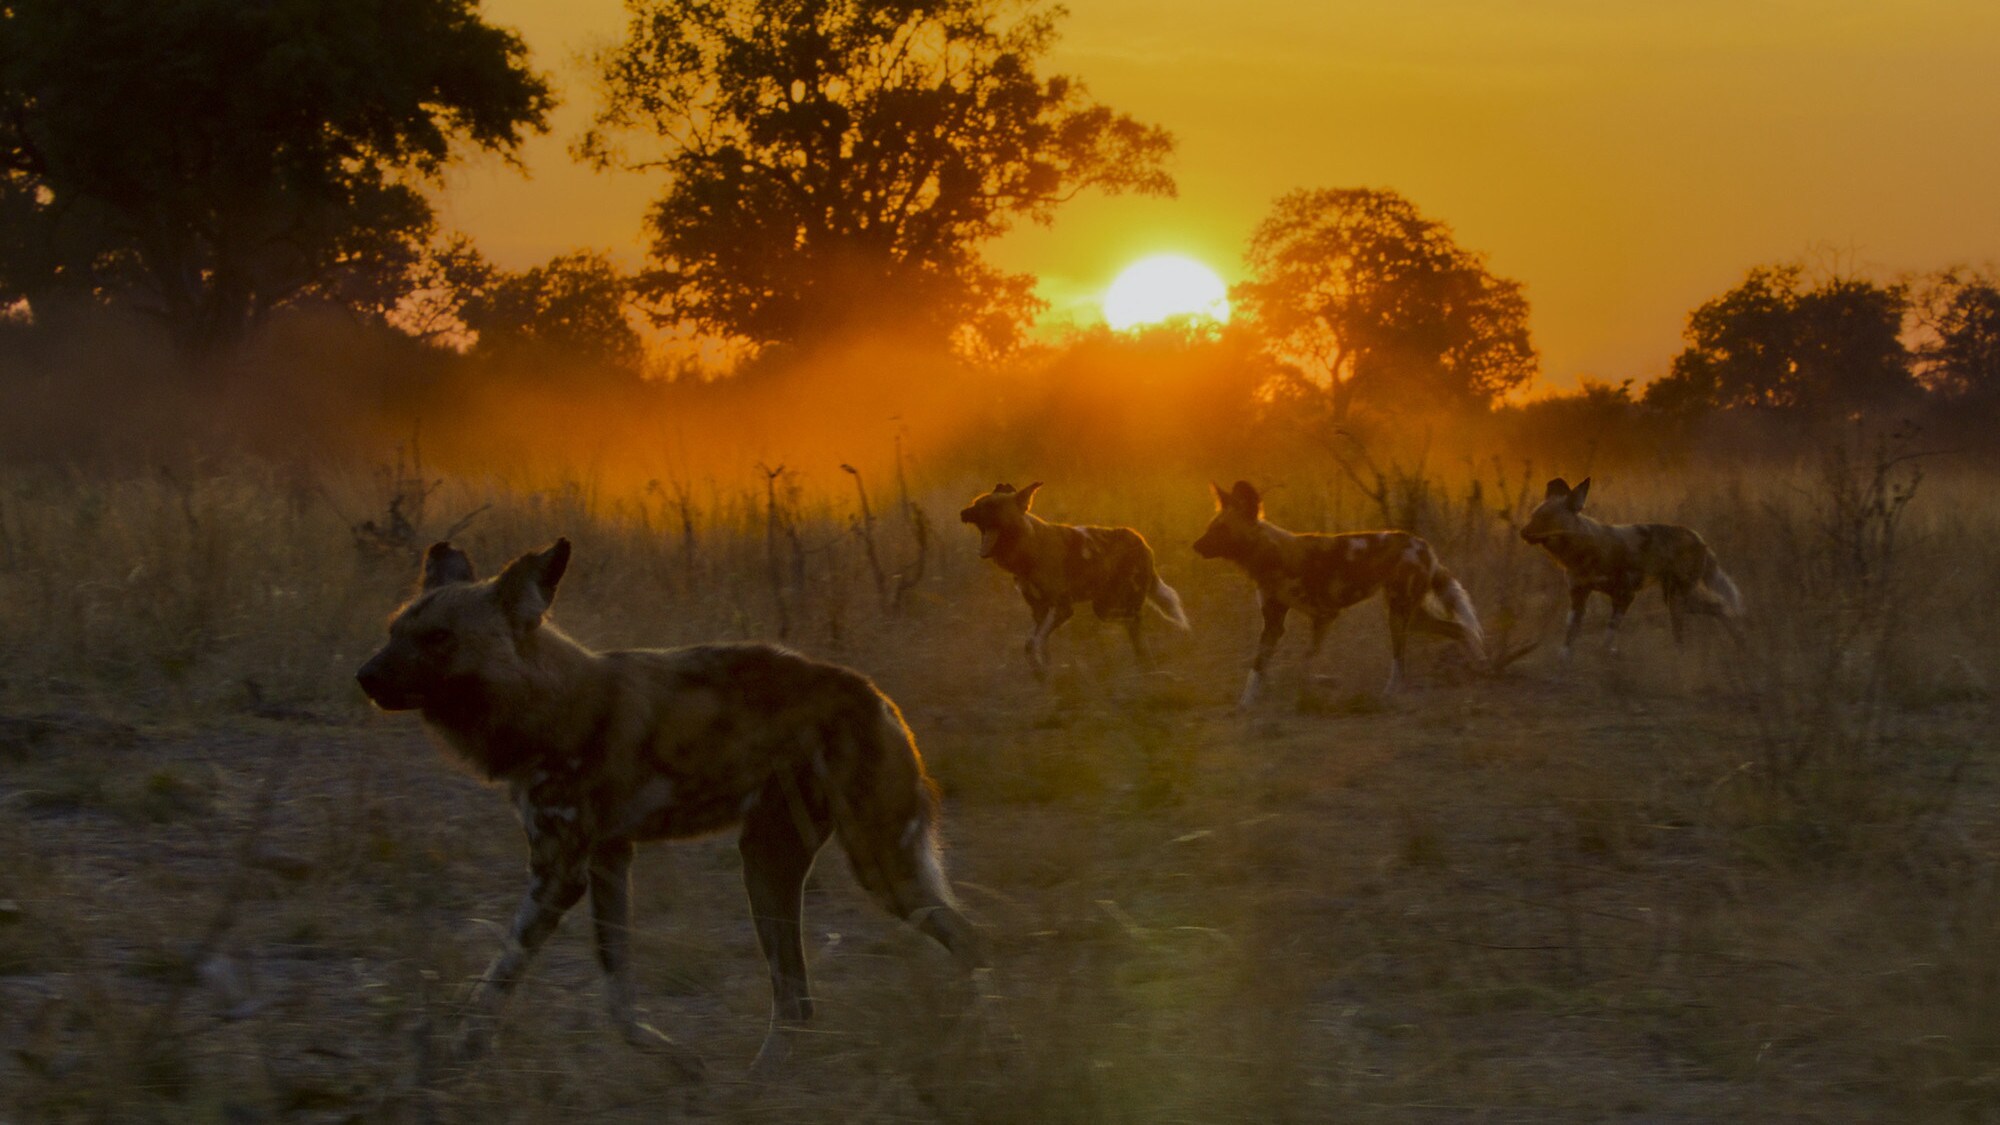 Sunsetting behind a pack of dogs. (National Geographic for Disney+/Sam Stewart)